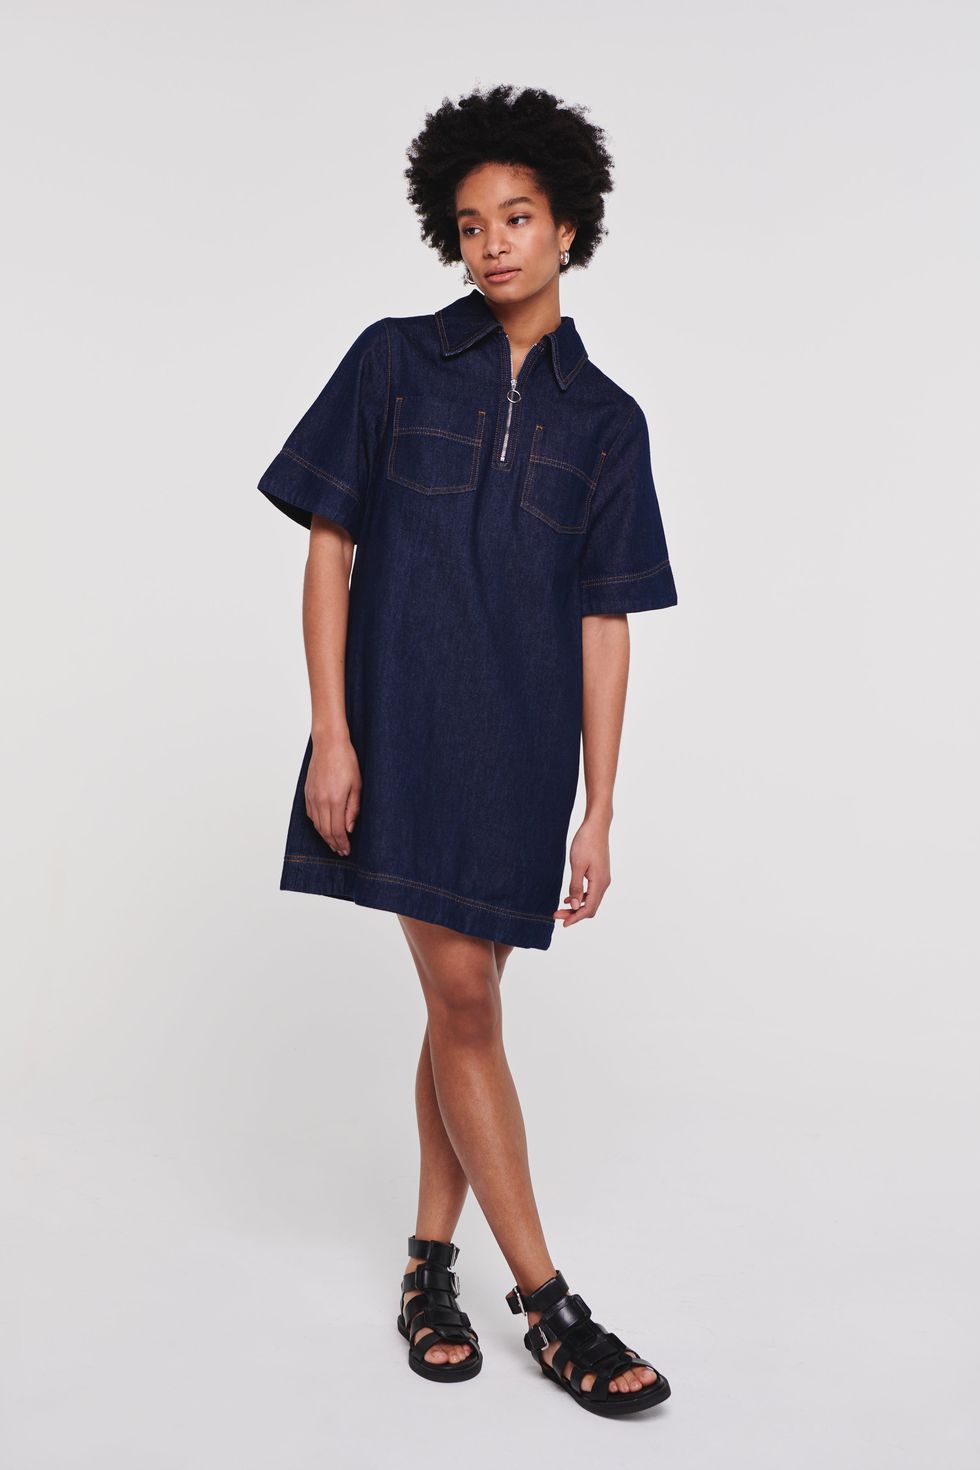 Aligne's denim dress is the perfect transitional piece to take you into ...